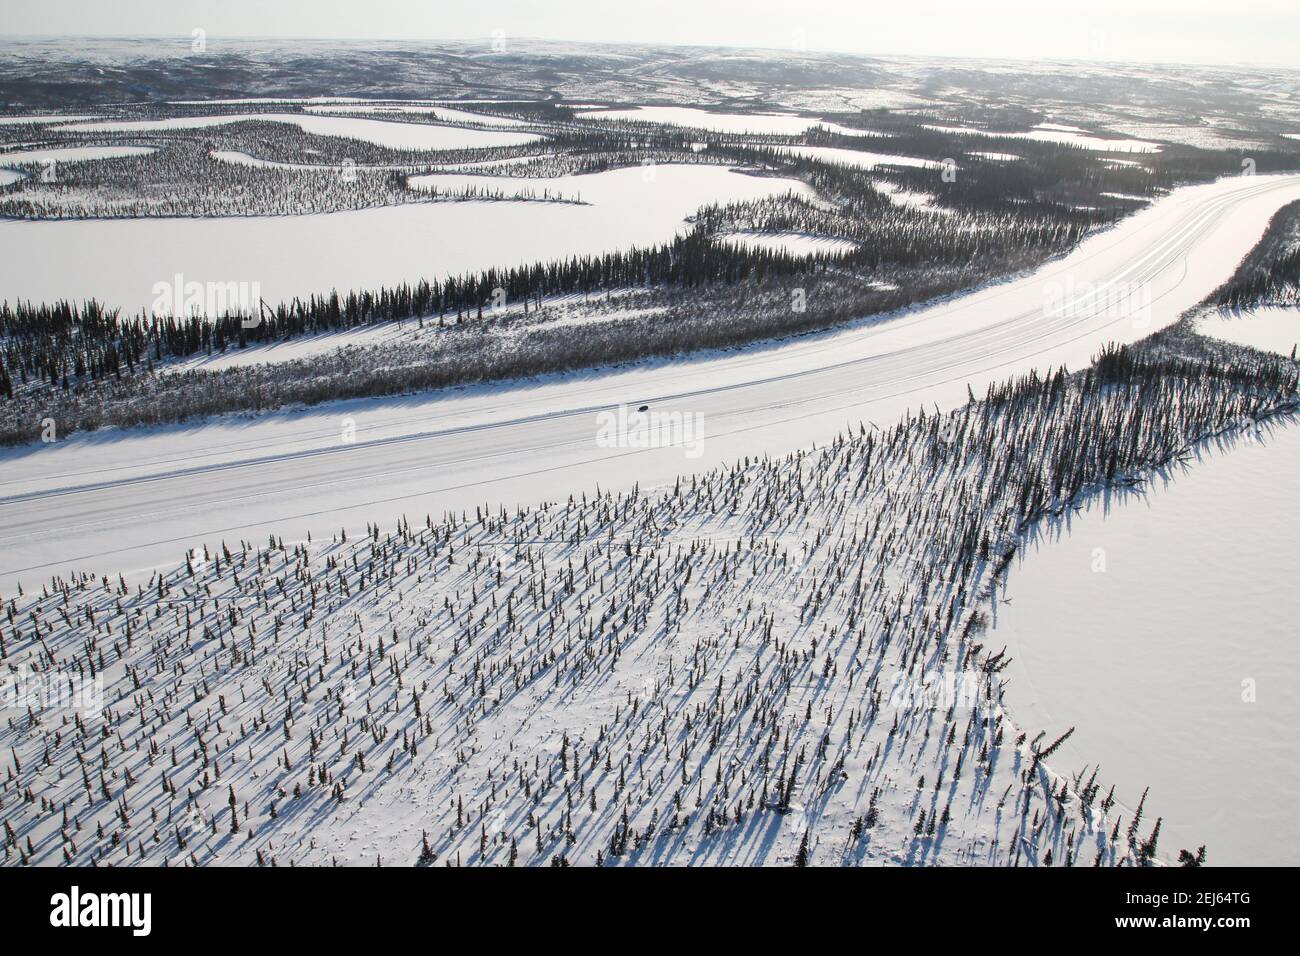 Aerial view of vehicle driving the Mackenzie River ice road in winter, in the Beaufort Delta, Northwest Territories, Canada's western Arctic. Stock Photo